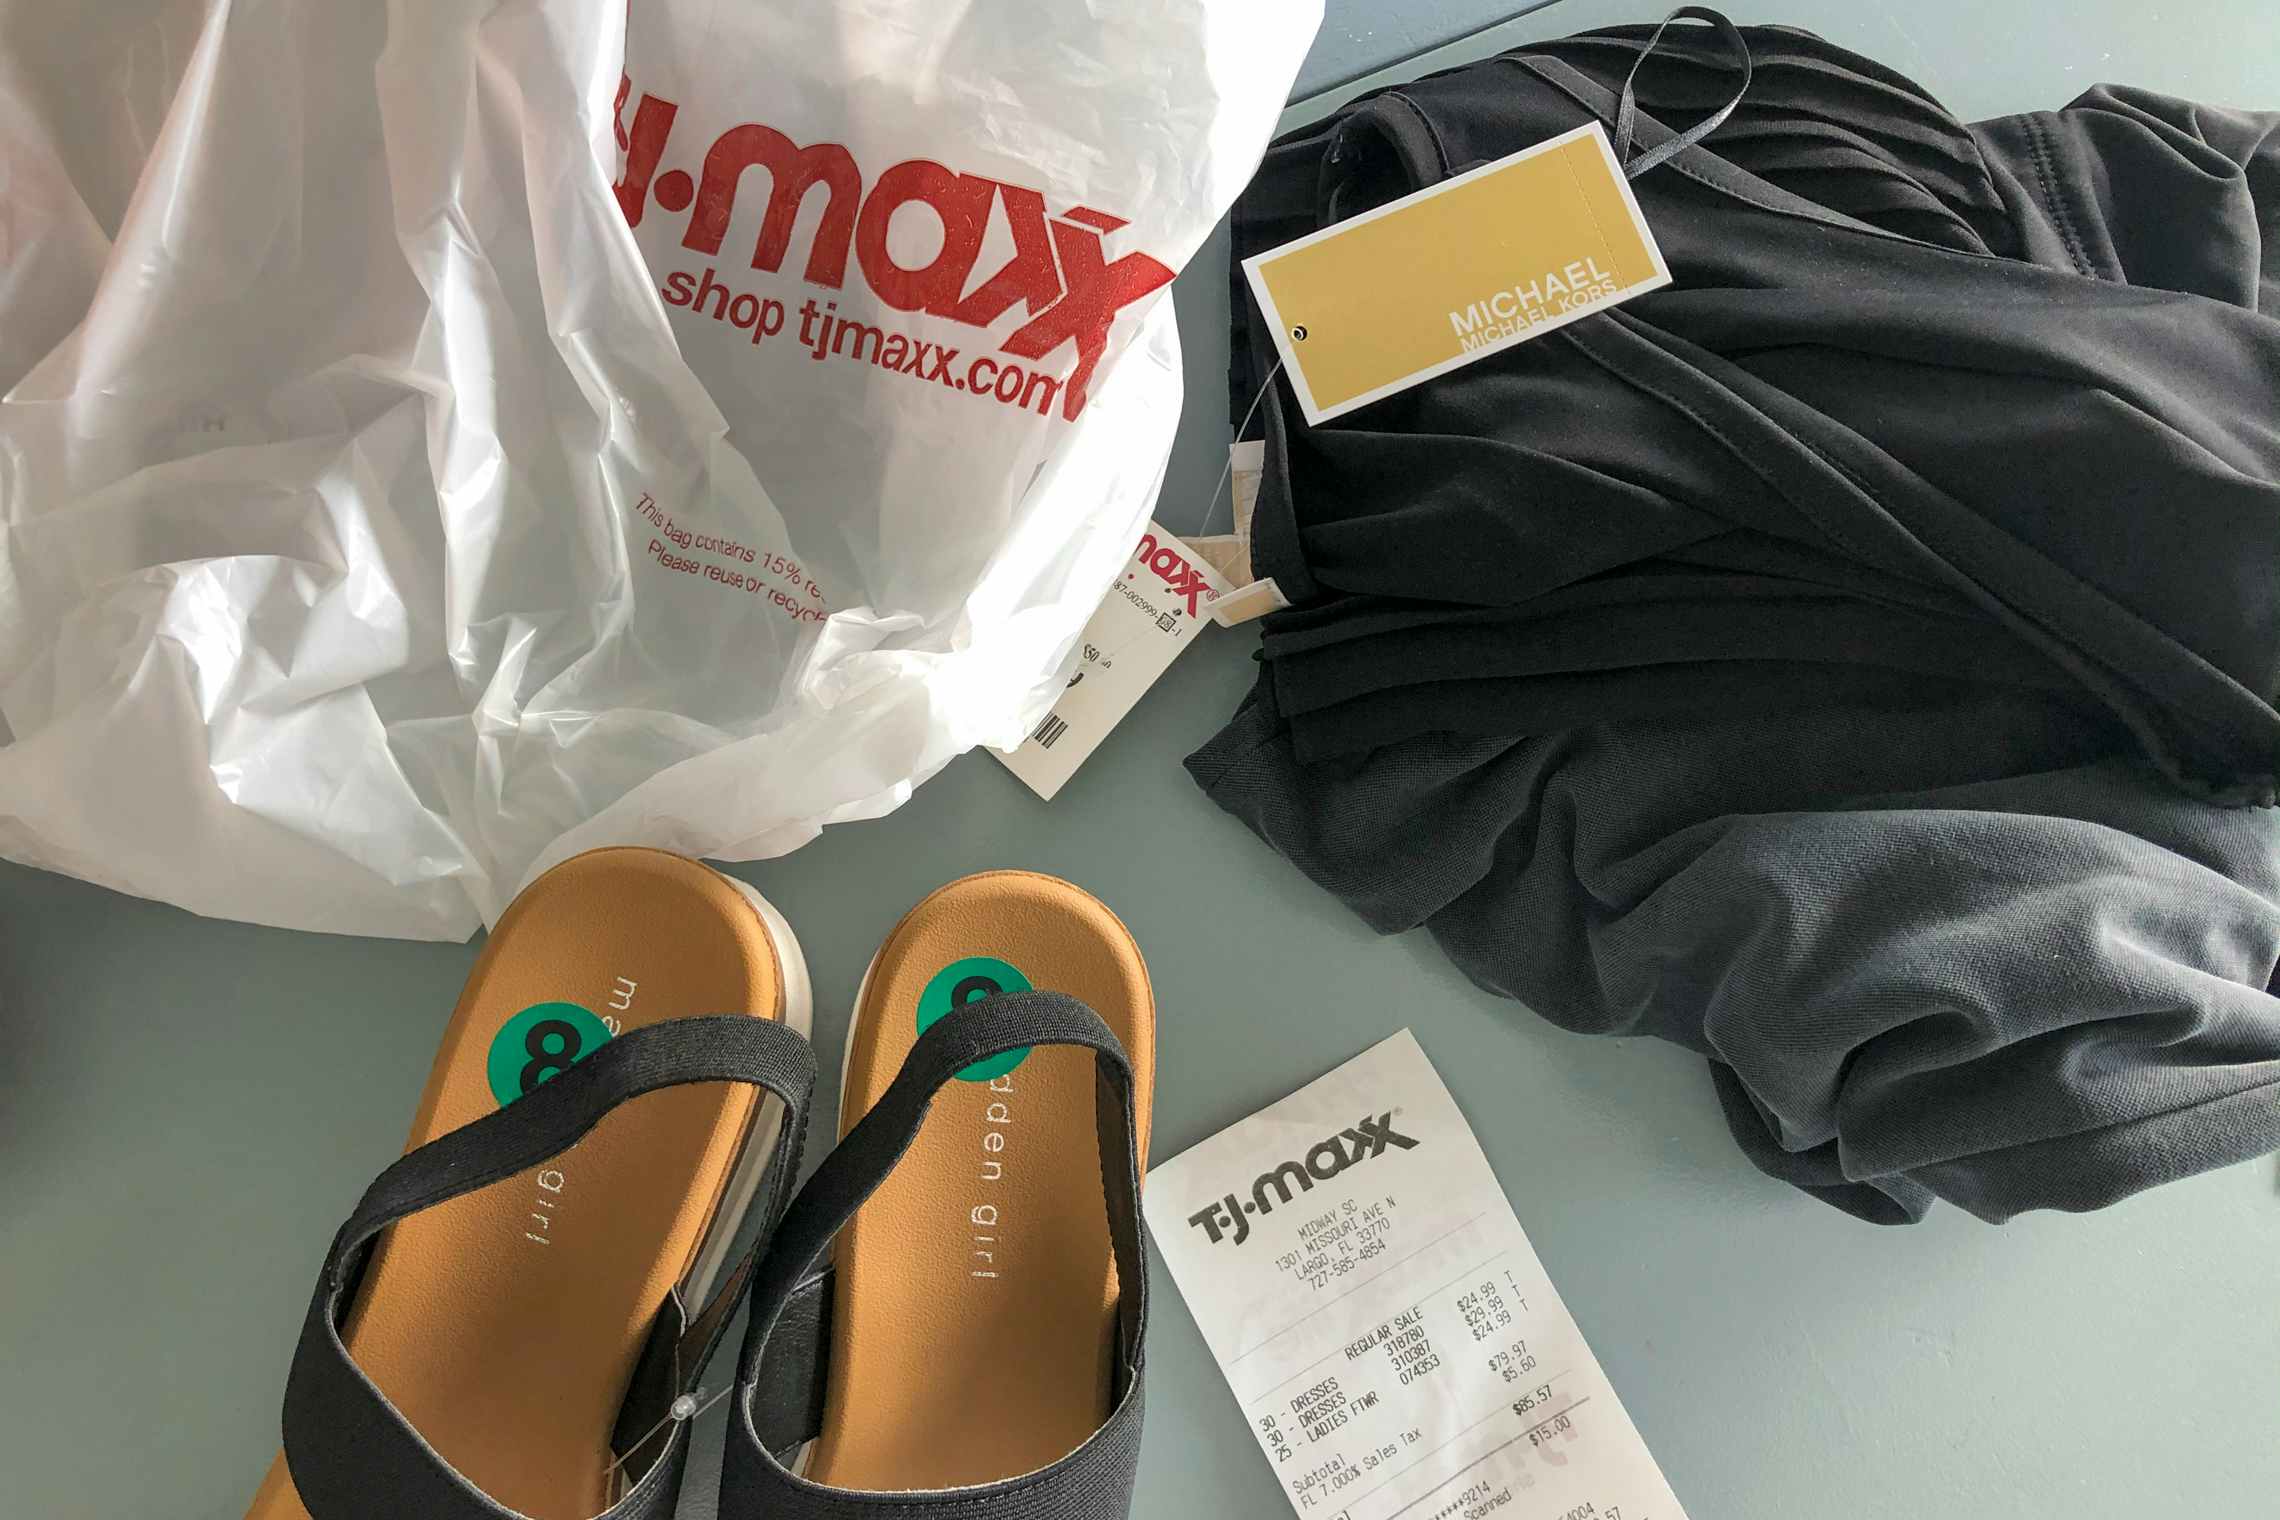 Tj Maxx Returns Simplified: No-Receipt Policy And Time Limits